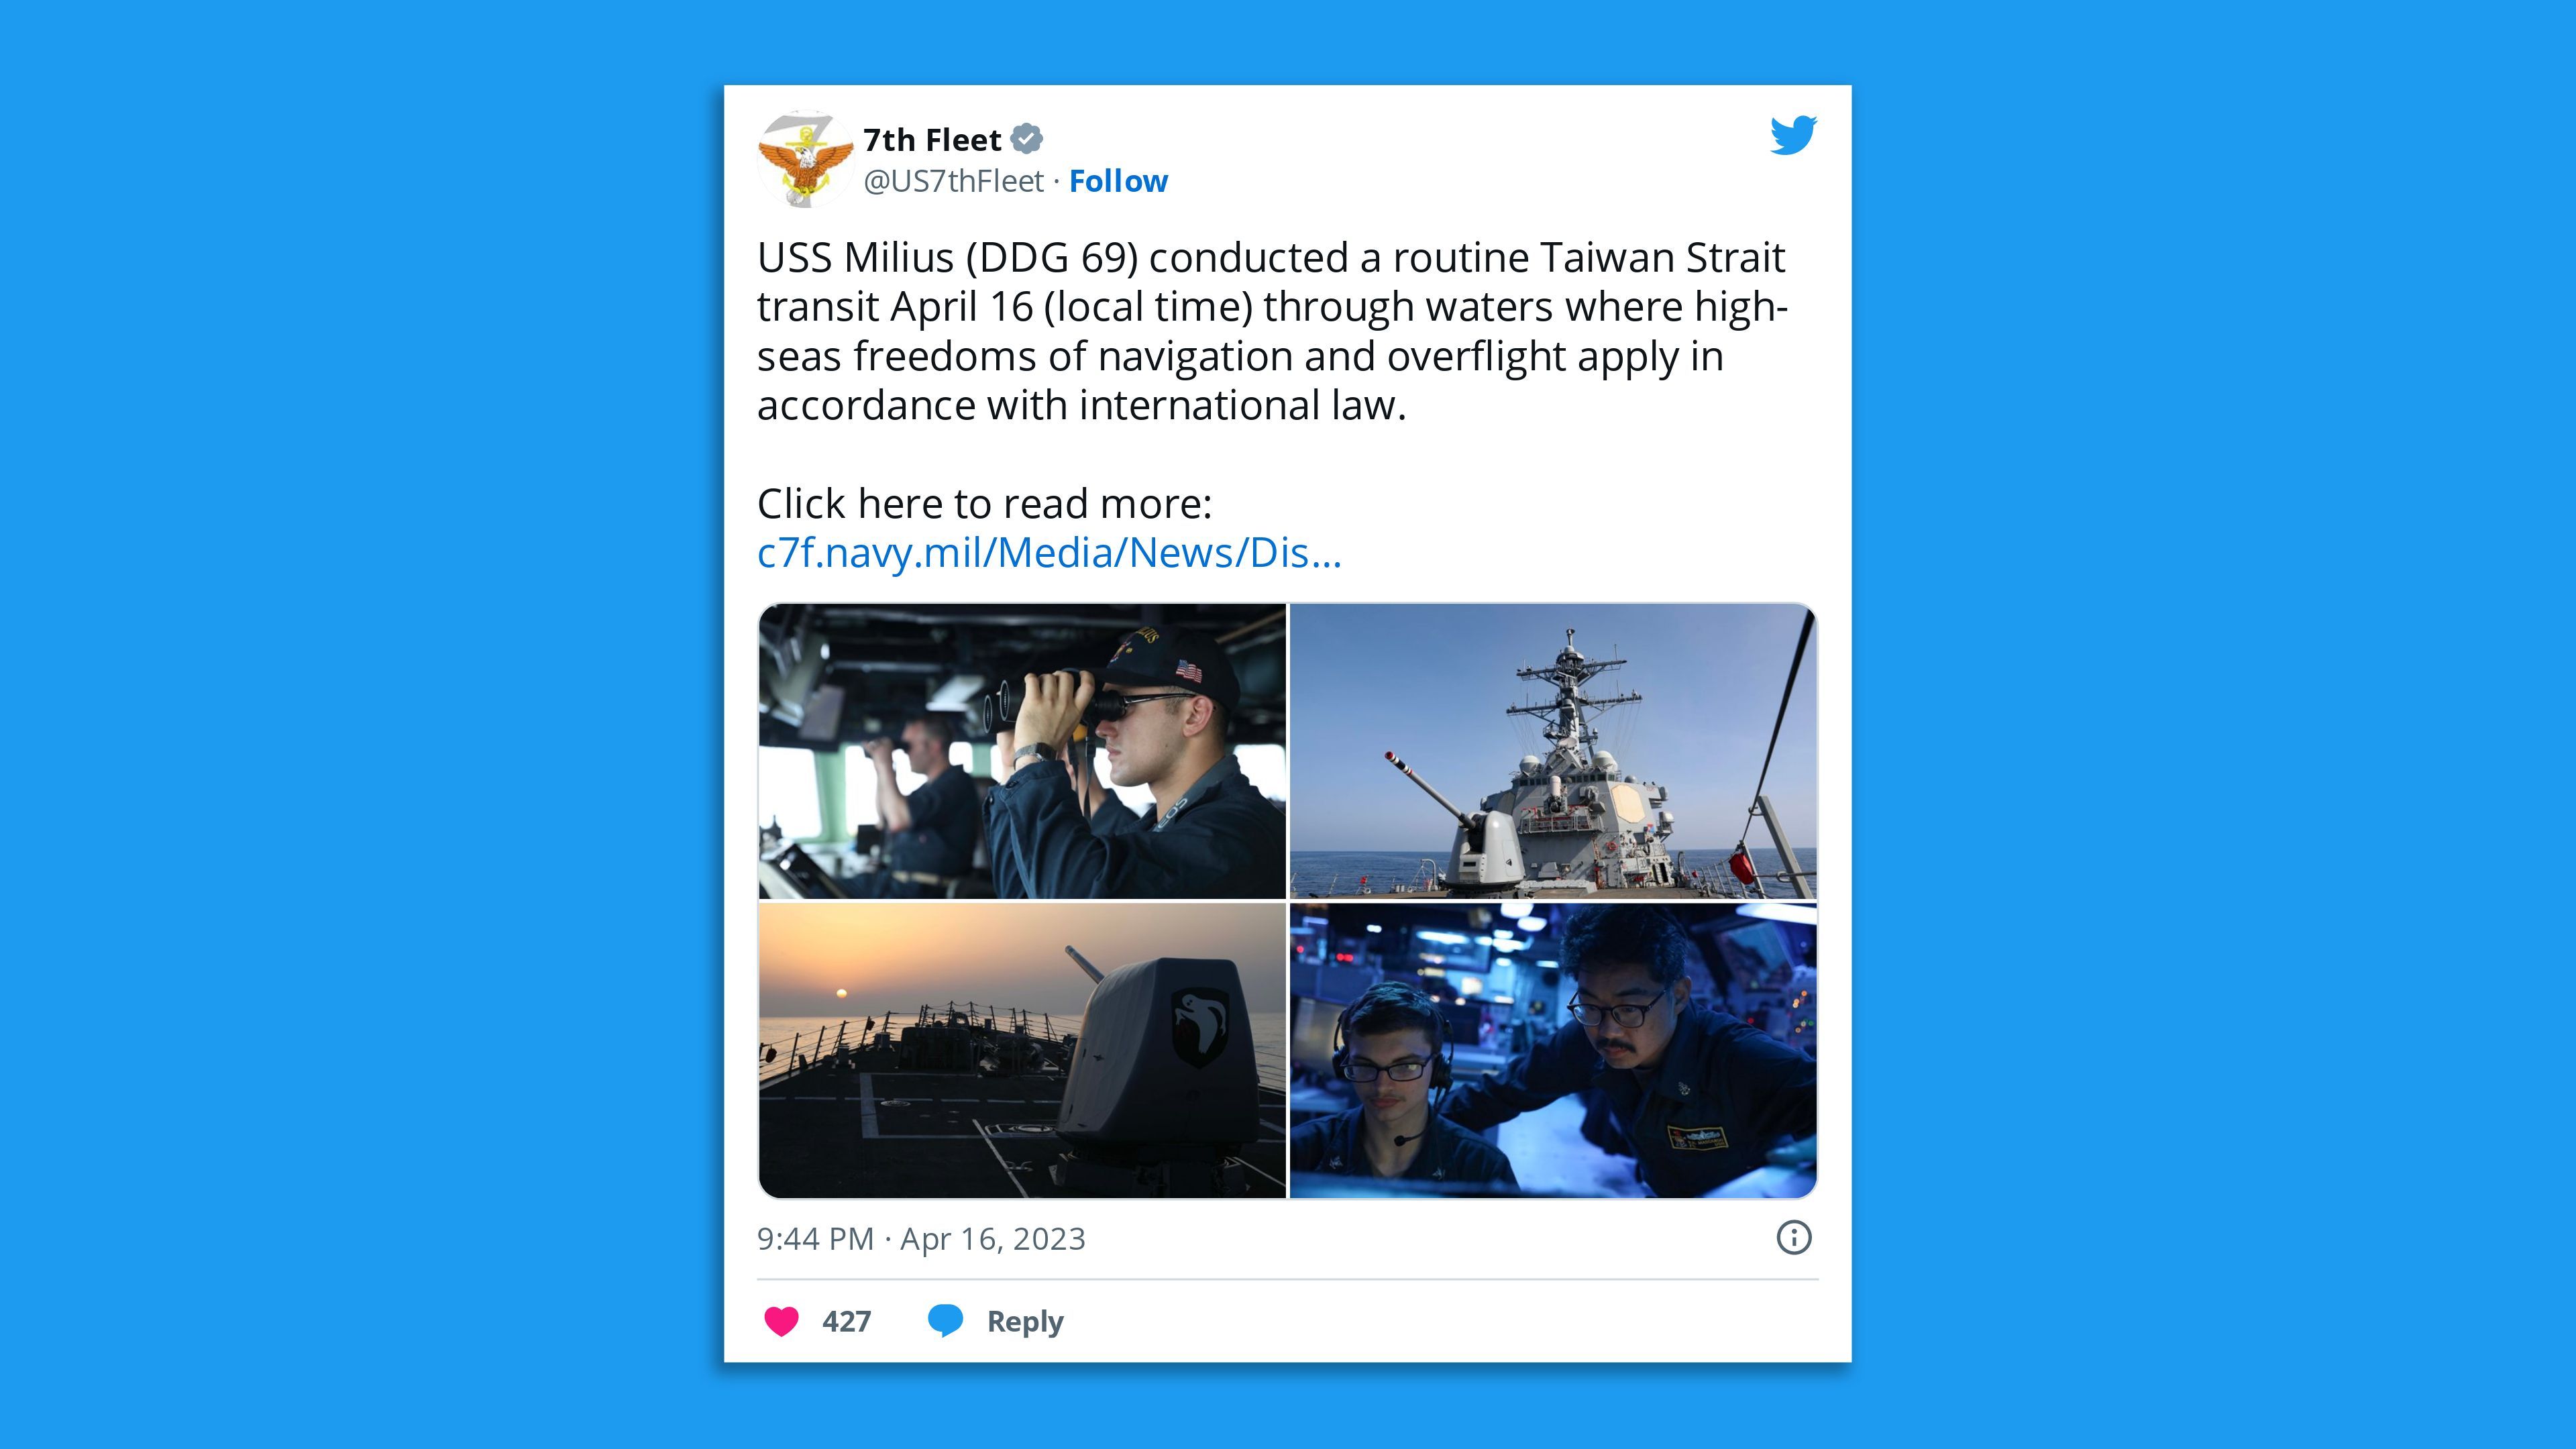 A screenshot of a US Navy photo tweet stating: "USS Milius (DDG 69) conducted a routine Taiwan Strait transit April 16 (local time) through waters where high-seas freedoms of navigation and overflight apply in accordance with international law."